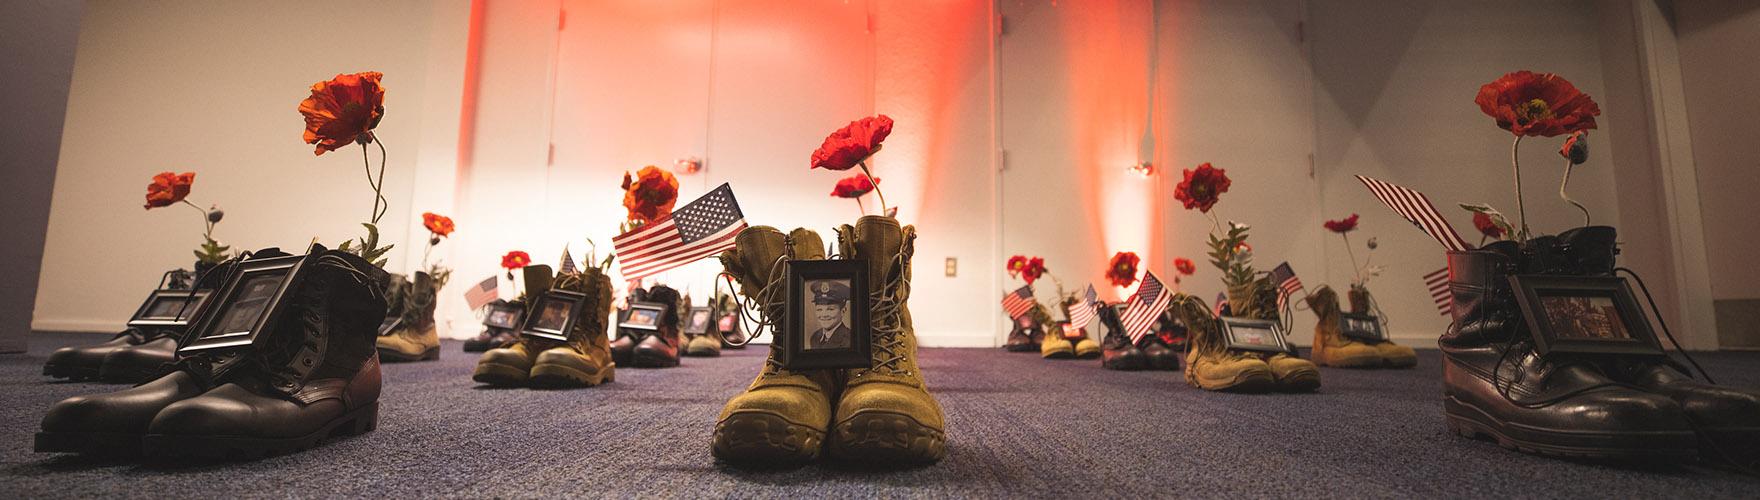 A Memorial Day display of boots, photos, and flowers honors those lost.